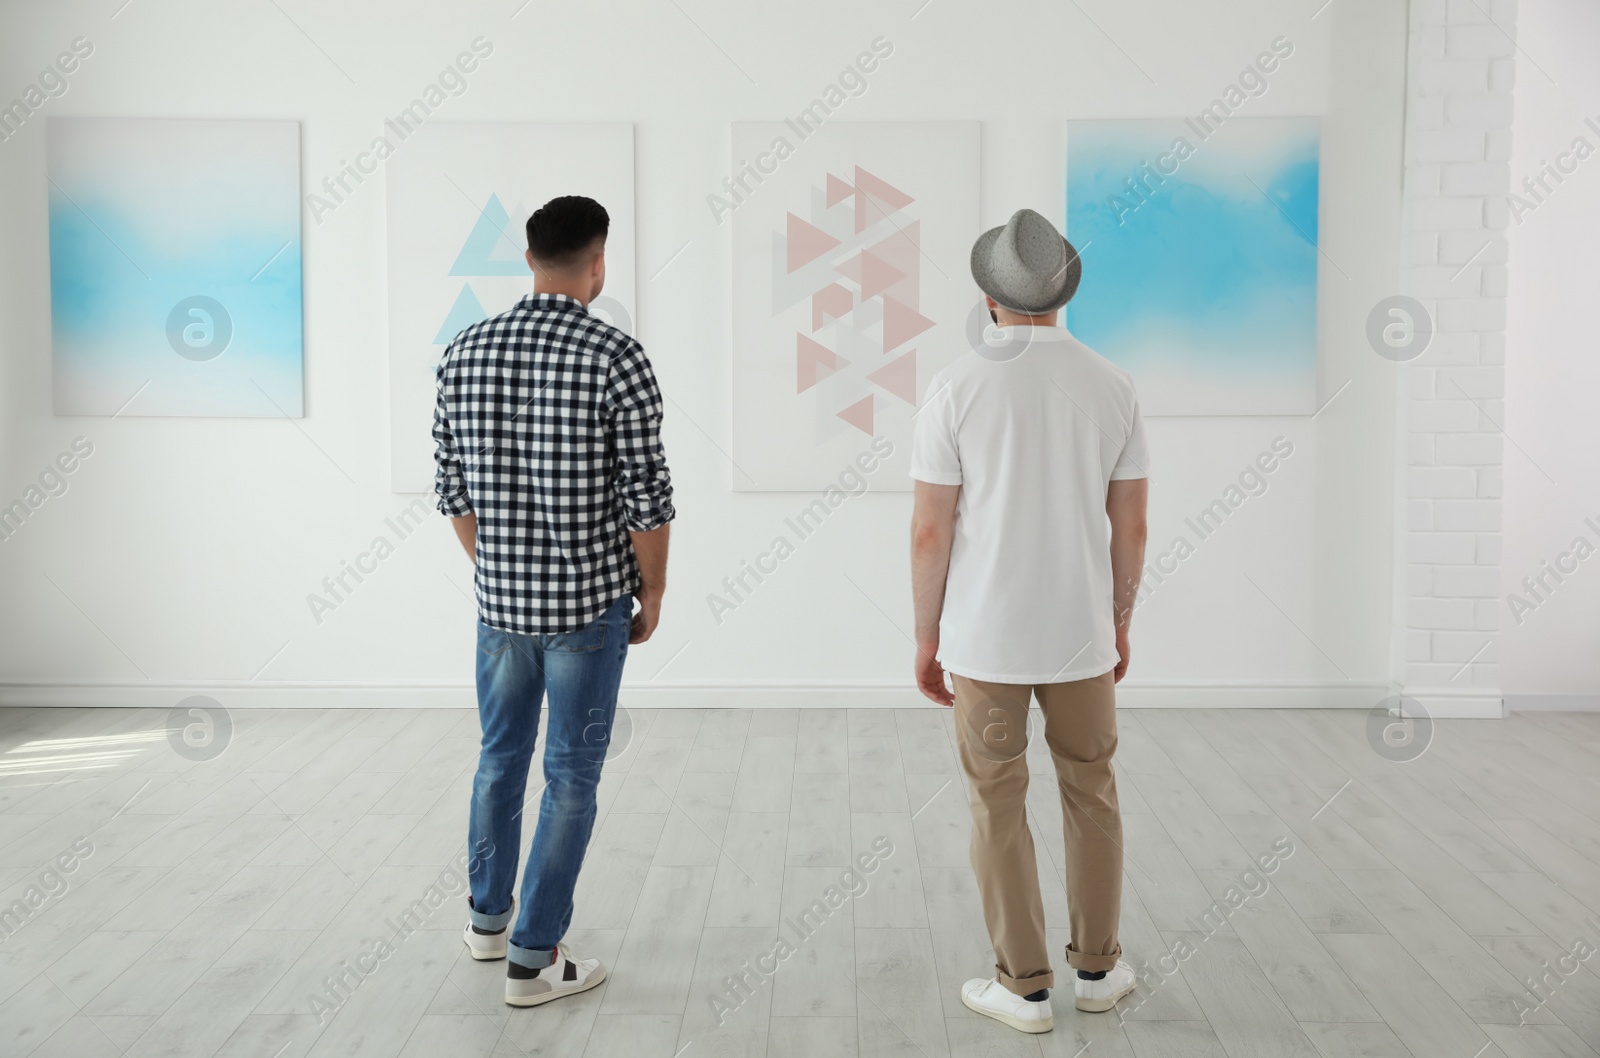 Photo of Men at exhibition in art gallery, back view